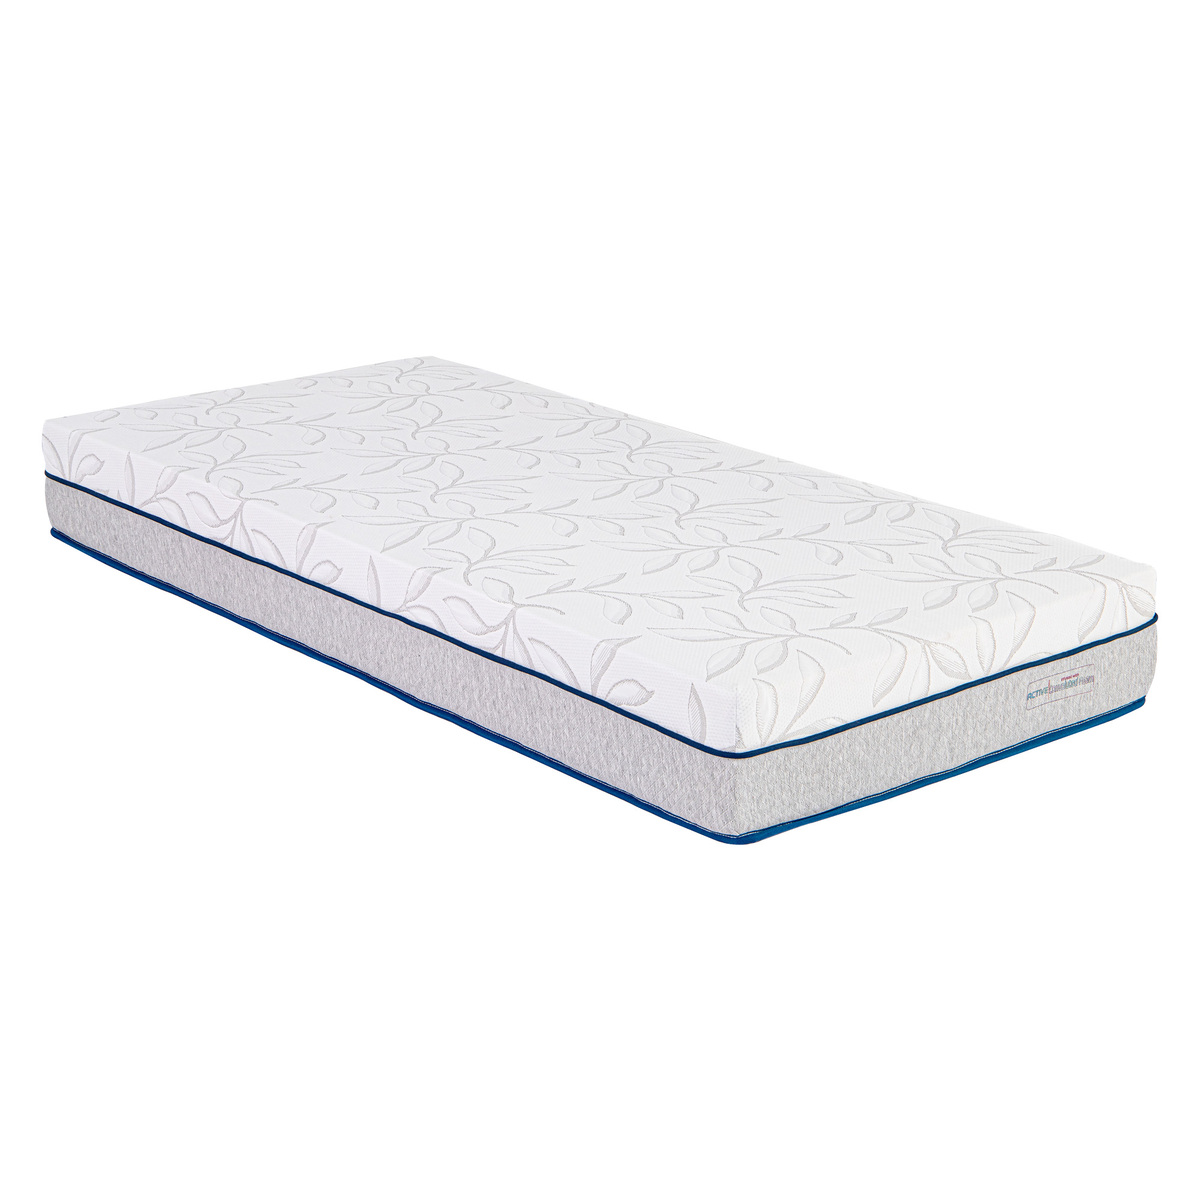 Royal Cozee Medical Gel Infused Mattress 200x150+20cm